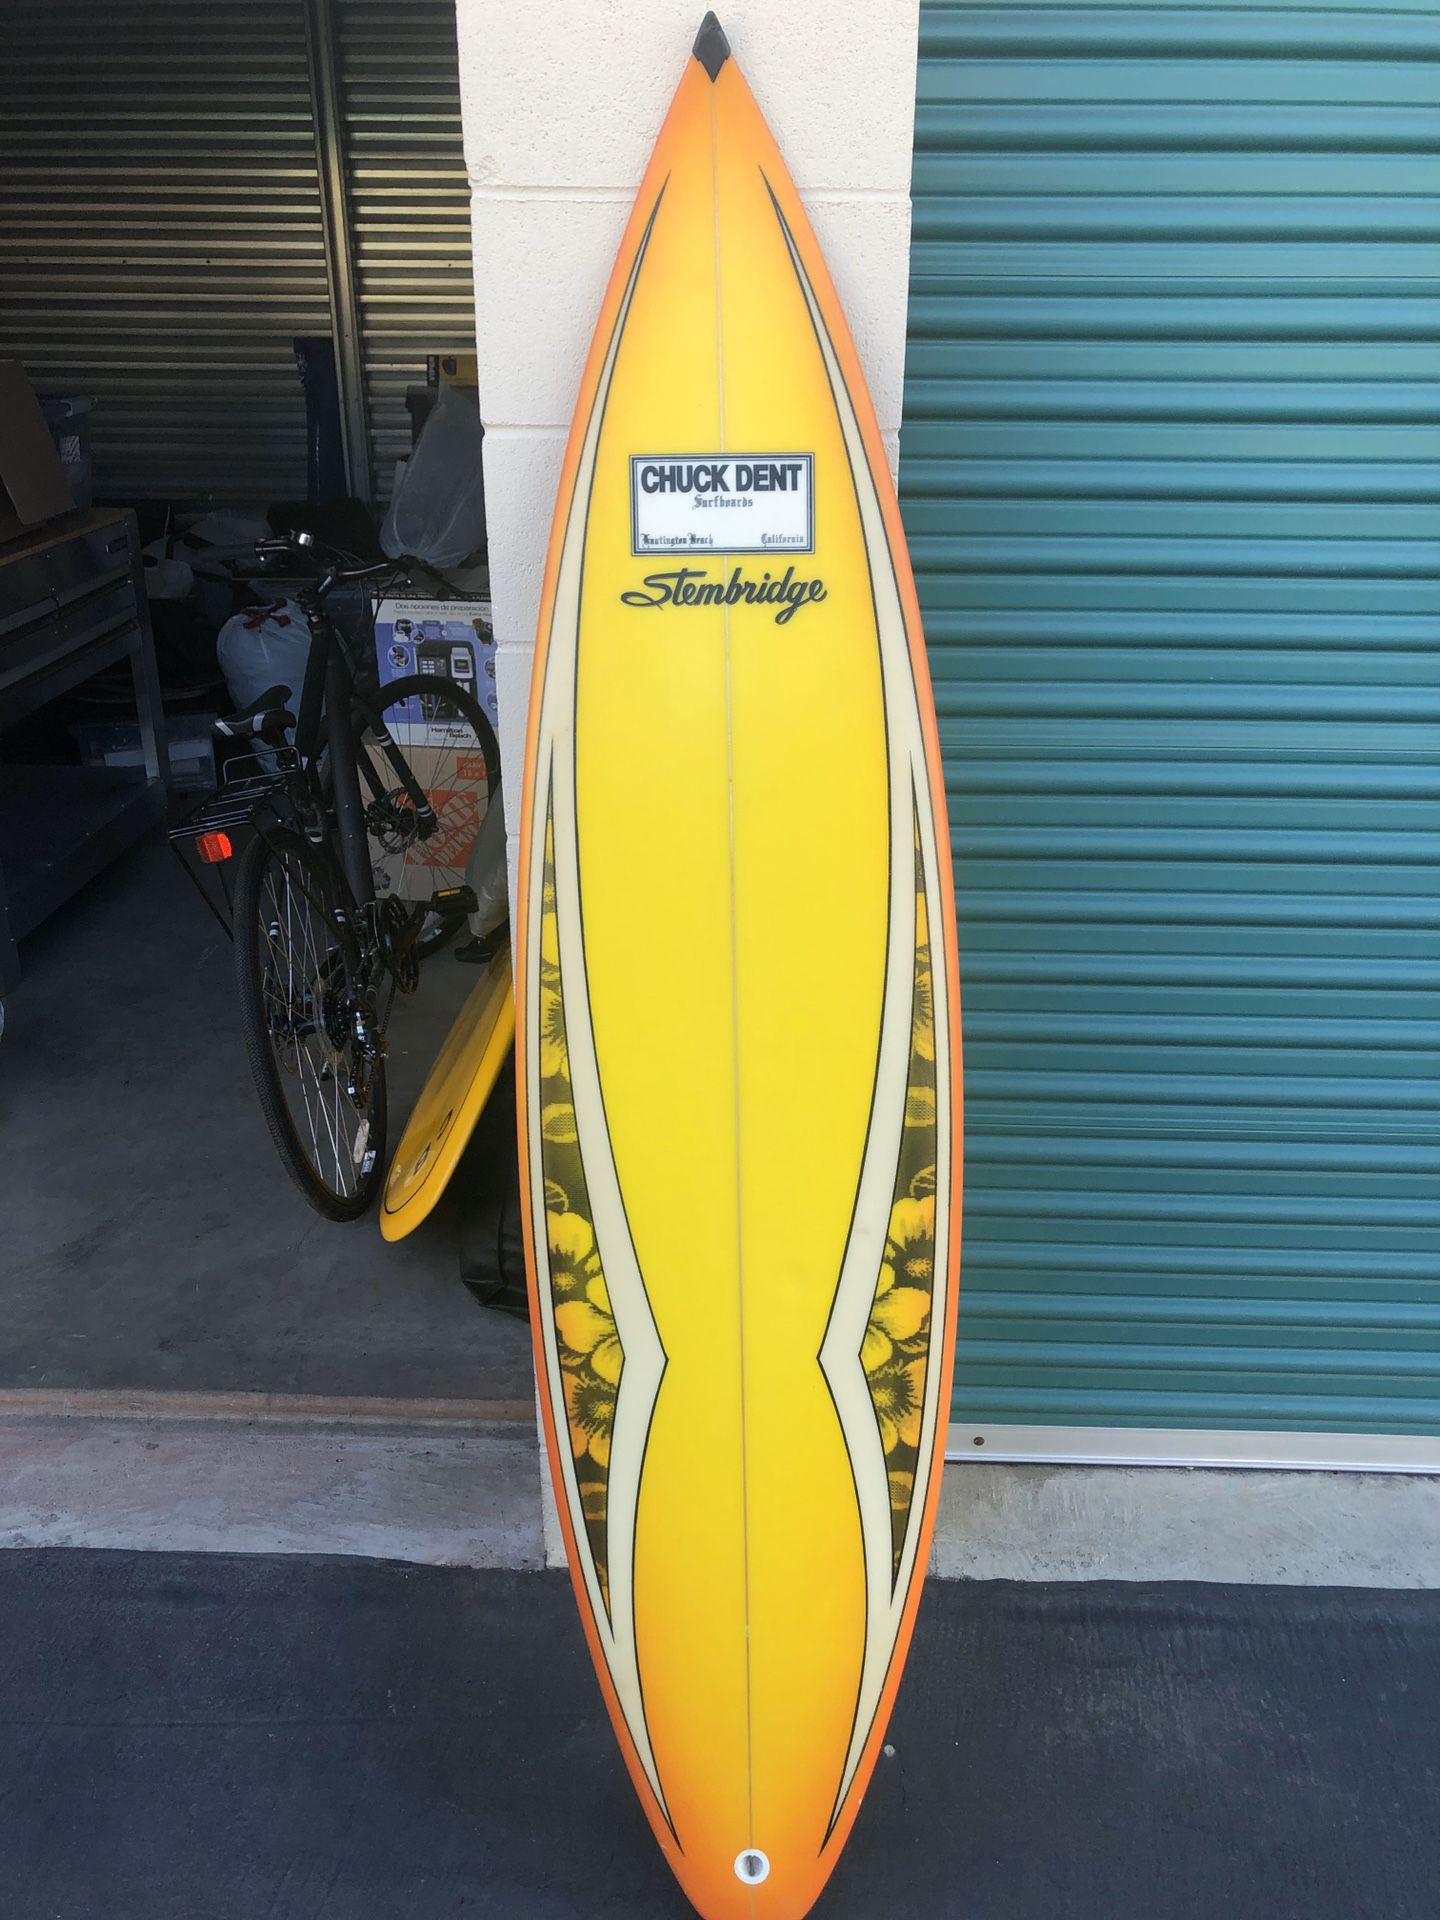 Chuck dent surfboard about 6ft long in very good condition